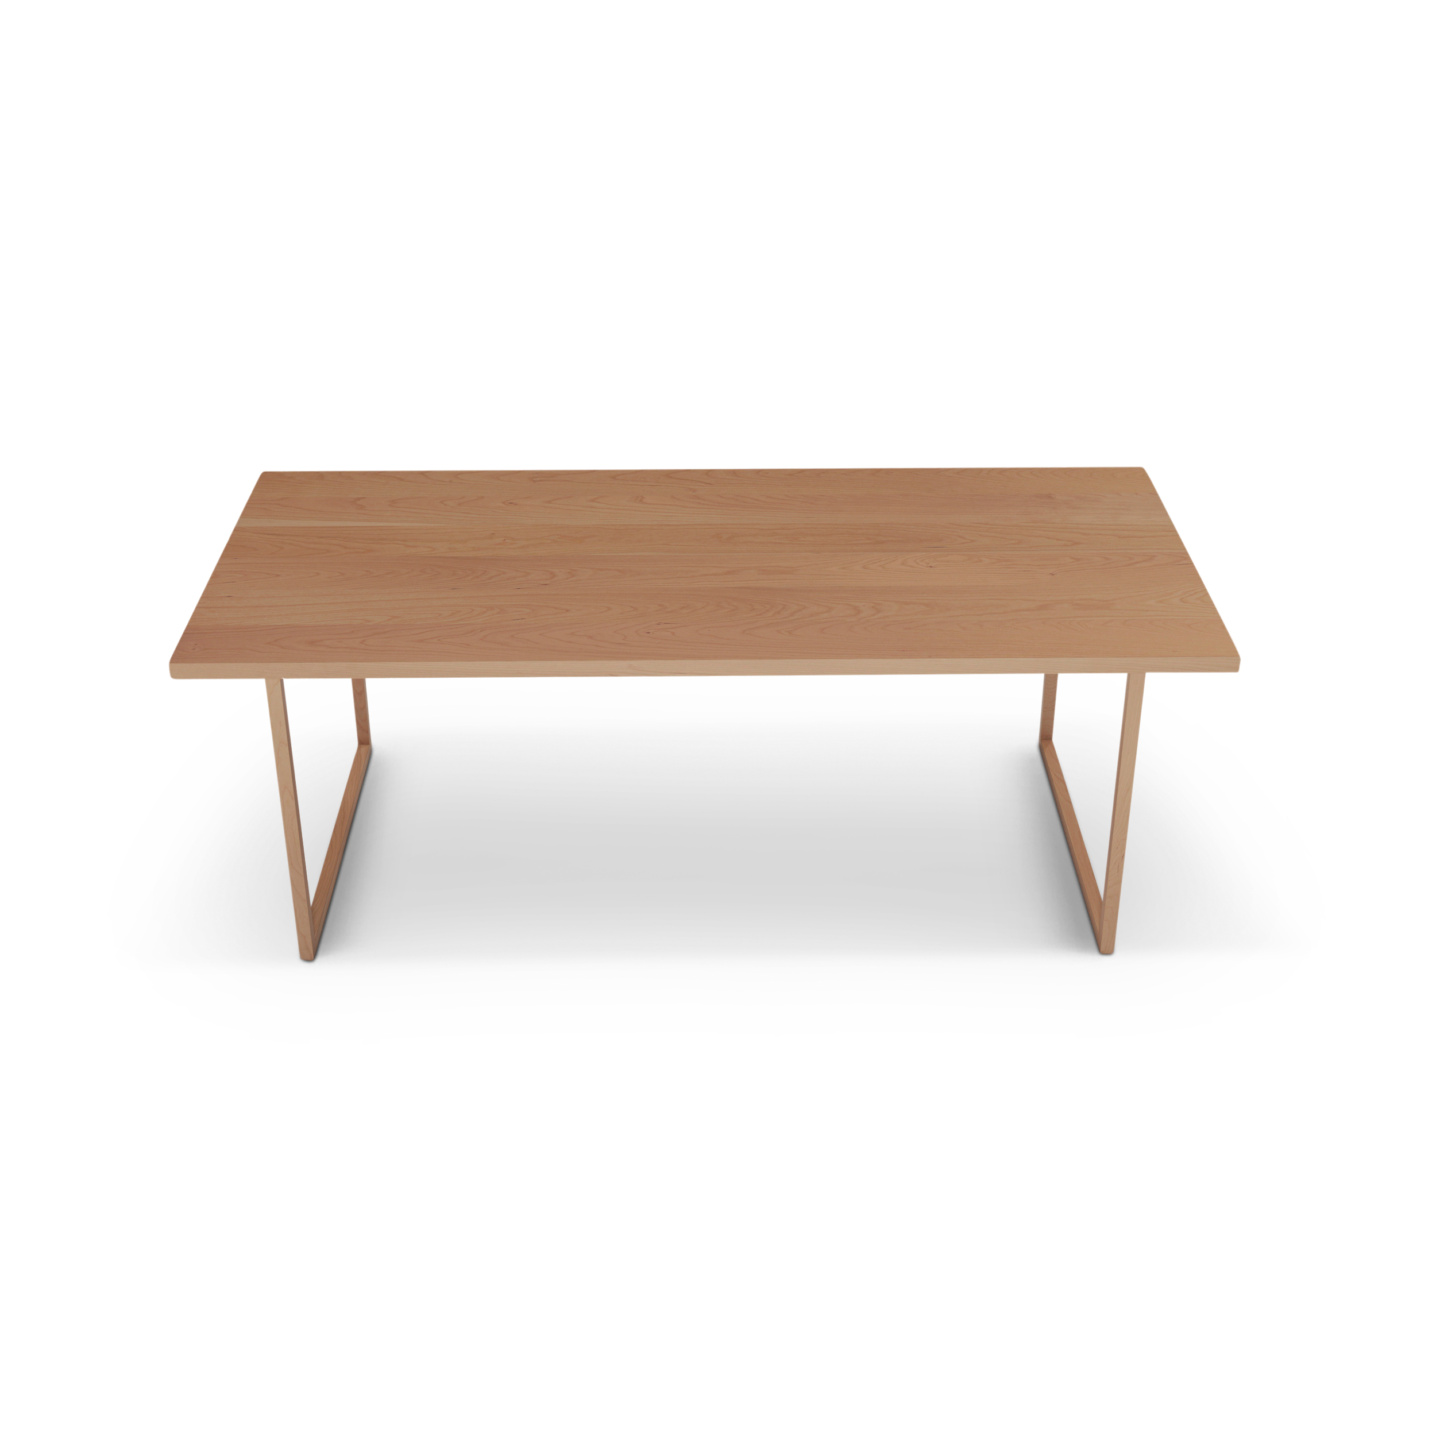 Cherry Table with solid wood planks